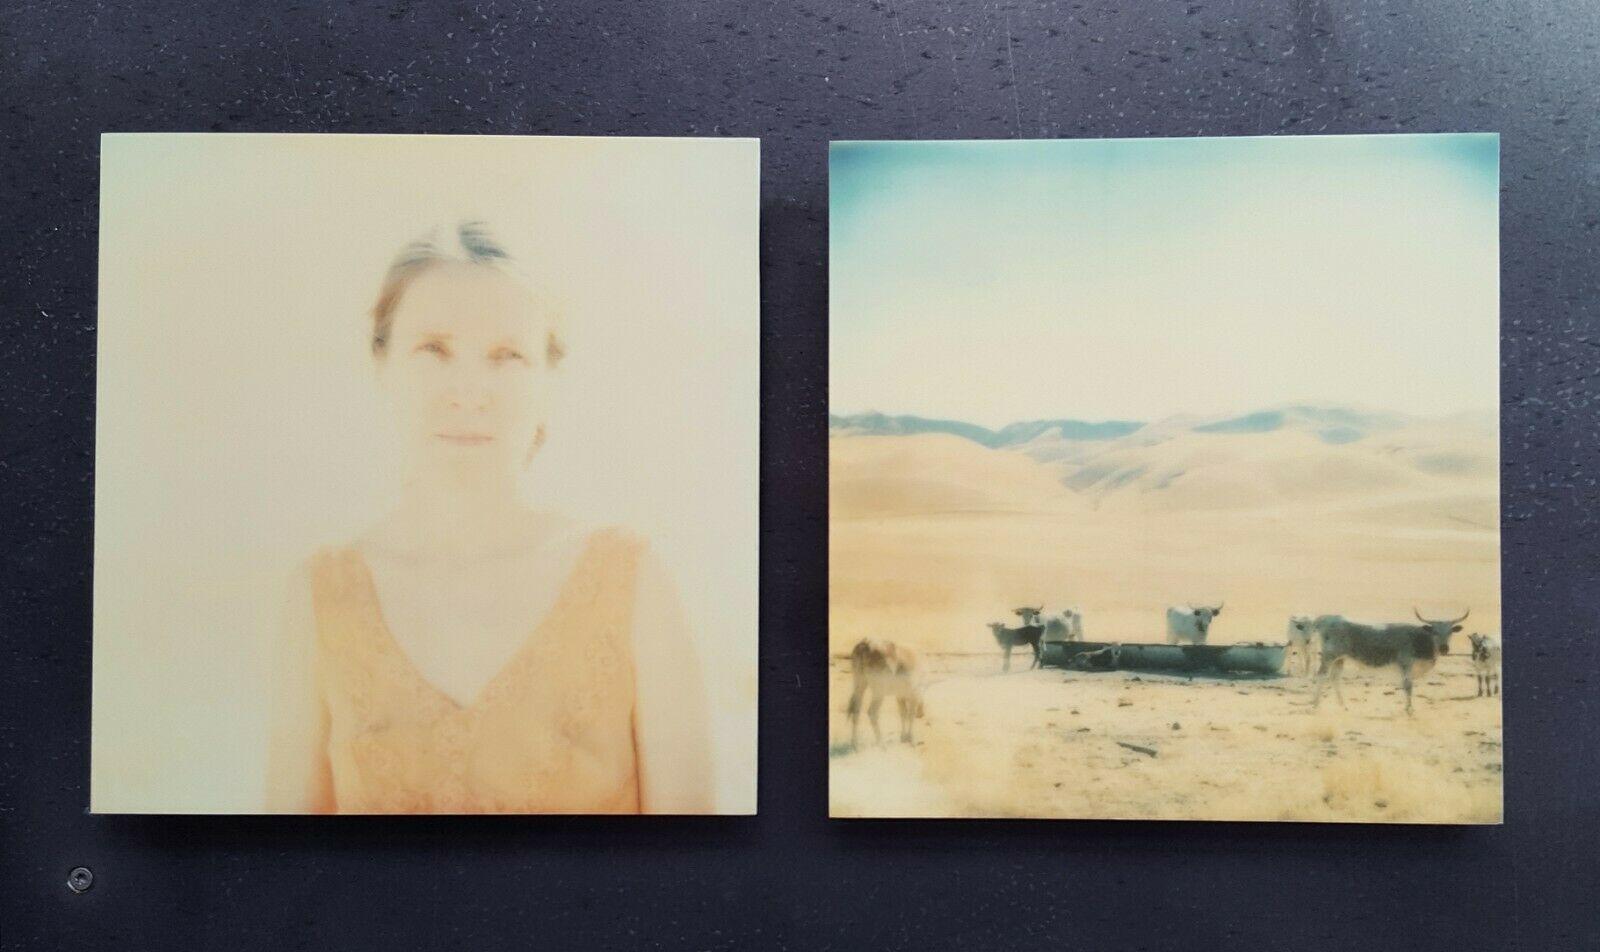 'Untitled' (Oilfields) 2004, - diptych. 

Edition of 10, plus 2 artist Proofs. 
20x20cm each, installed with gaps 20x43cm, 
2 Archival C-Prints, based on 2 expired Polaroids. 
Signature on verso with Certificate. 
Artist Inventory No. 1214.
Mounted